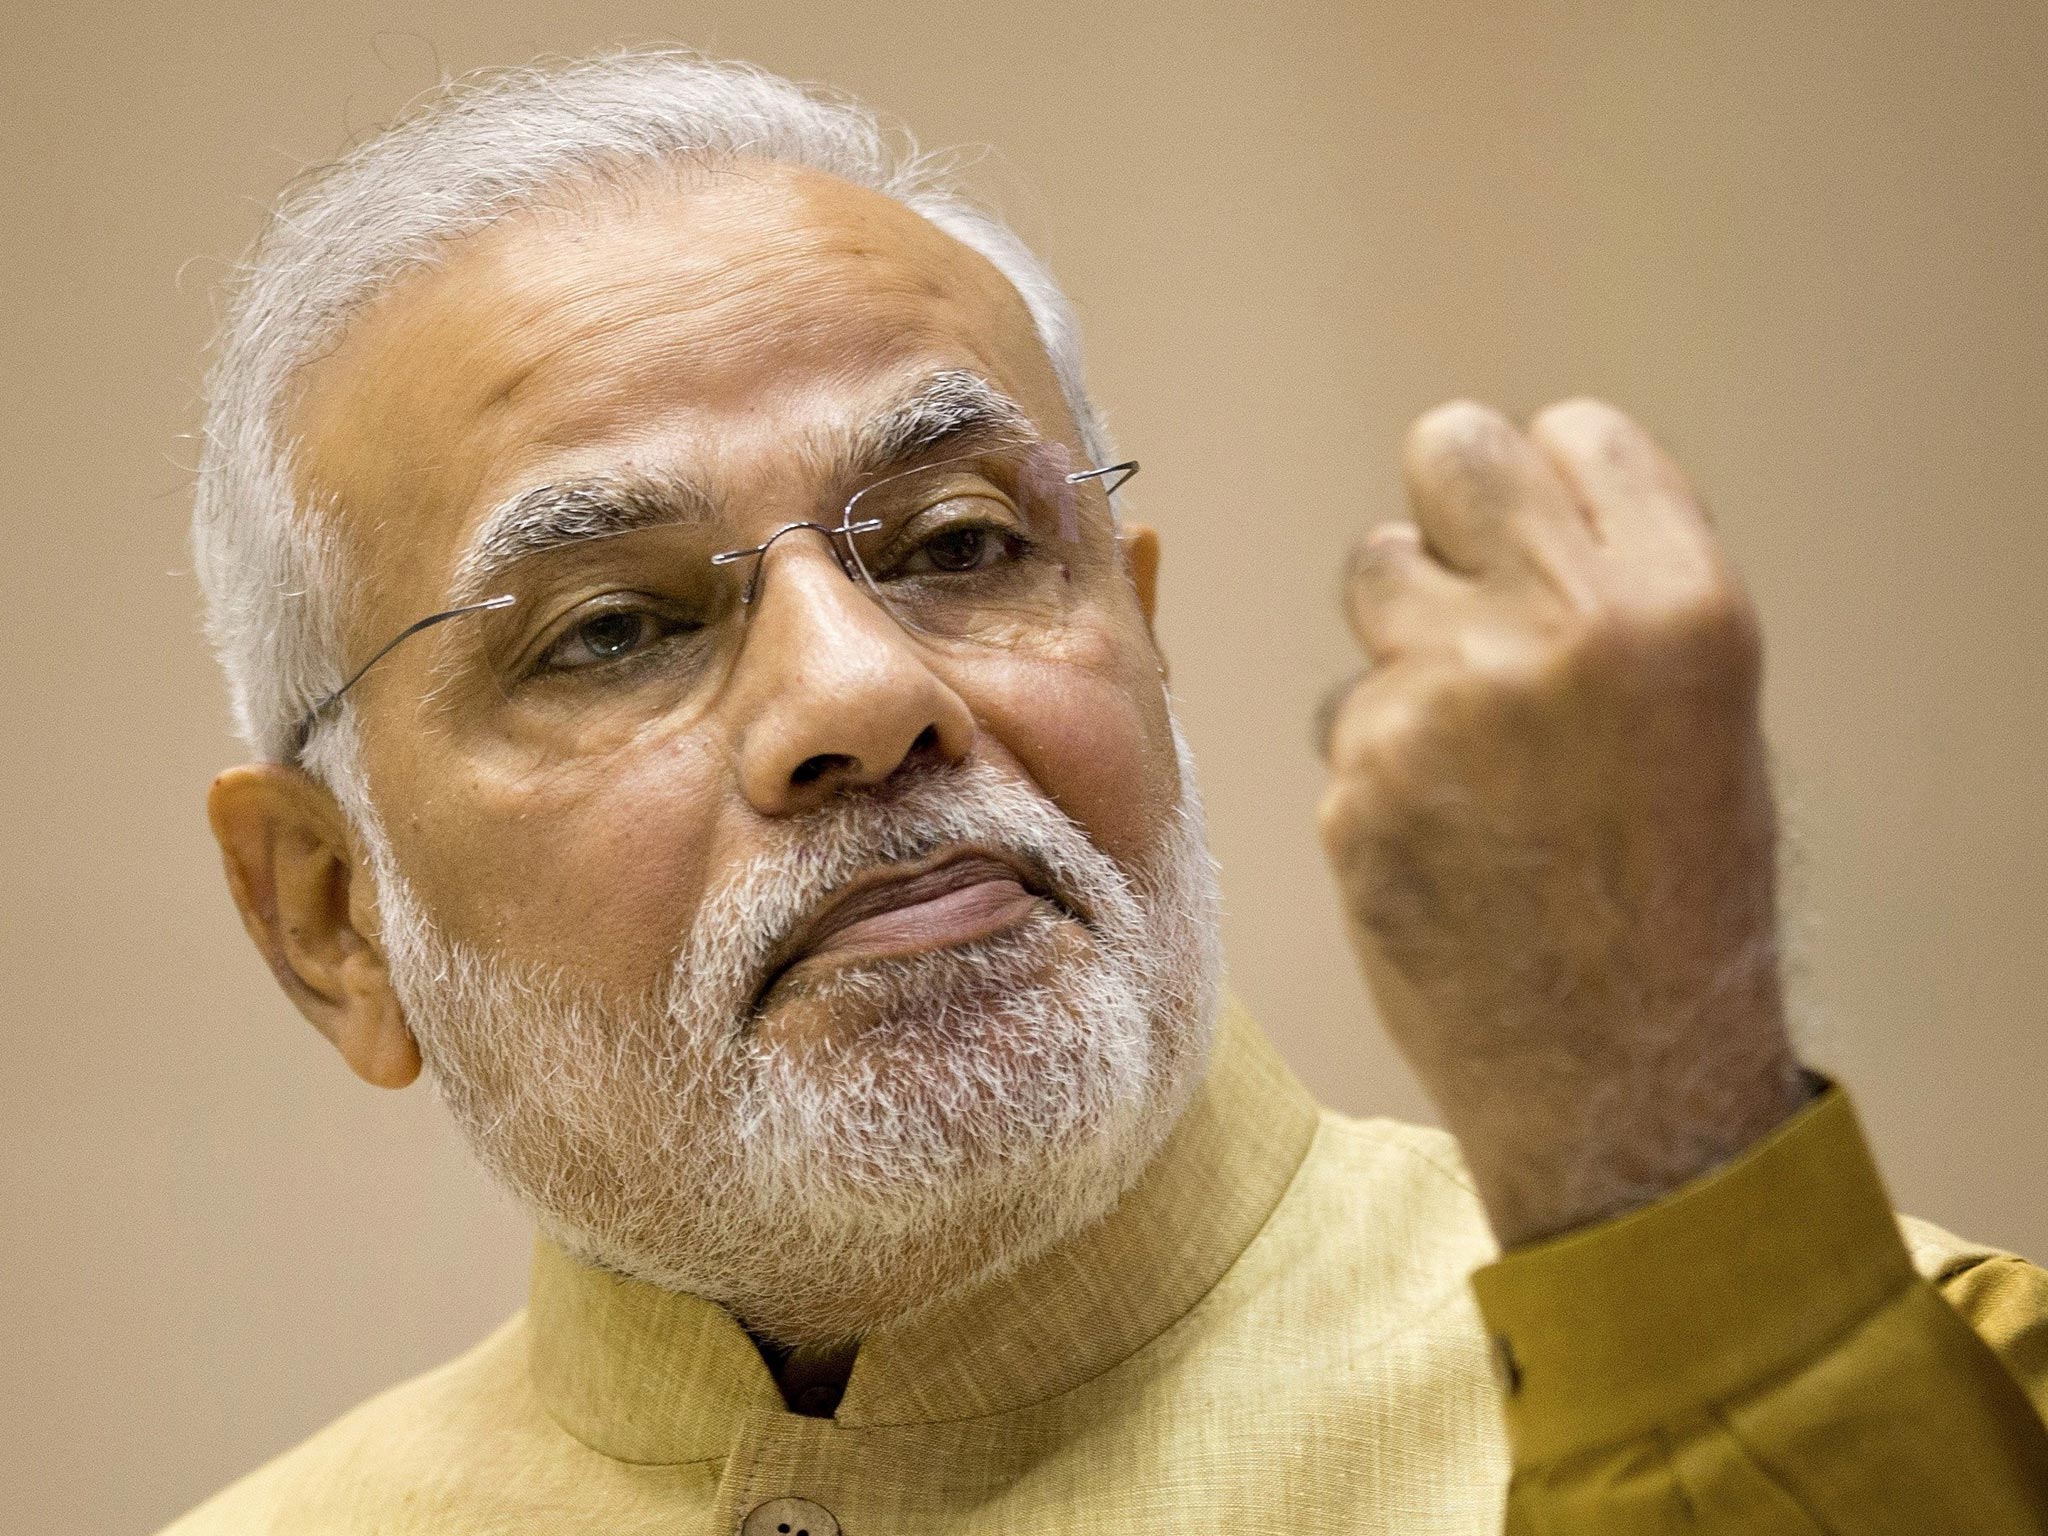 Prime Minister Narendra Modi’s party BJP has been blamed for anti-Muslim laws in India